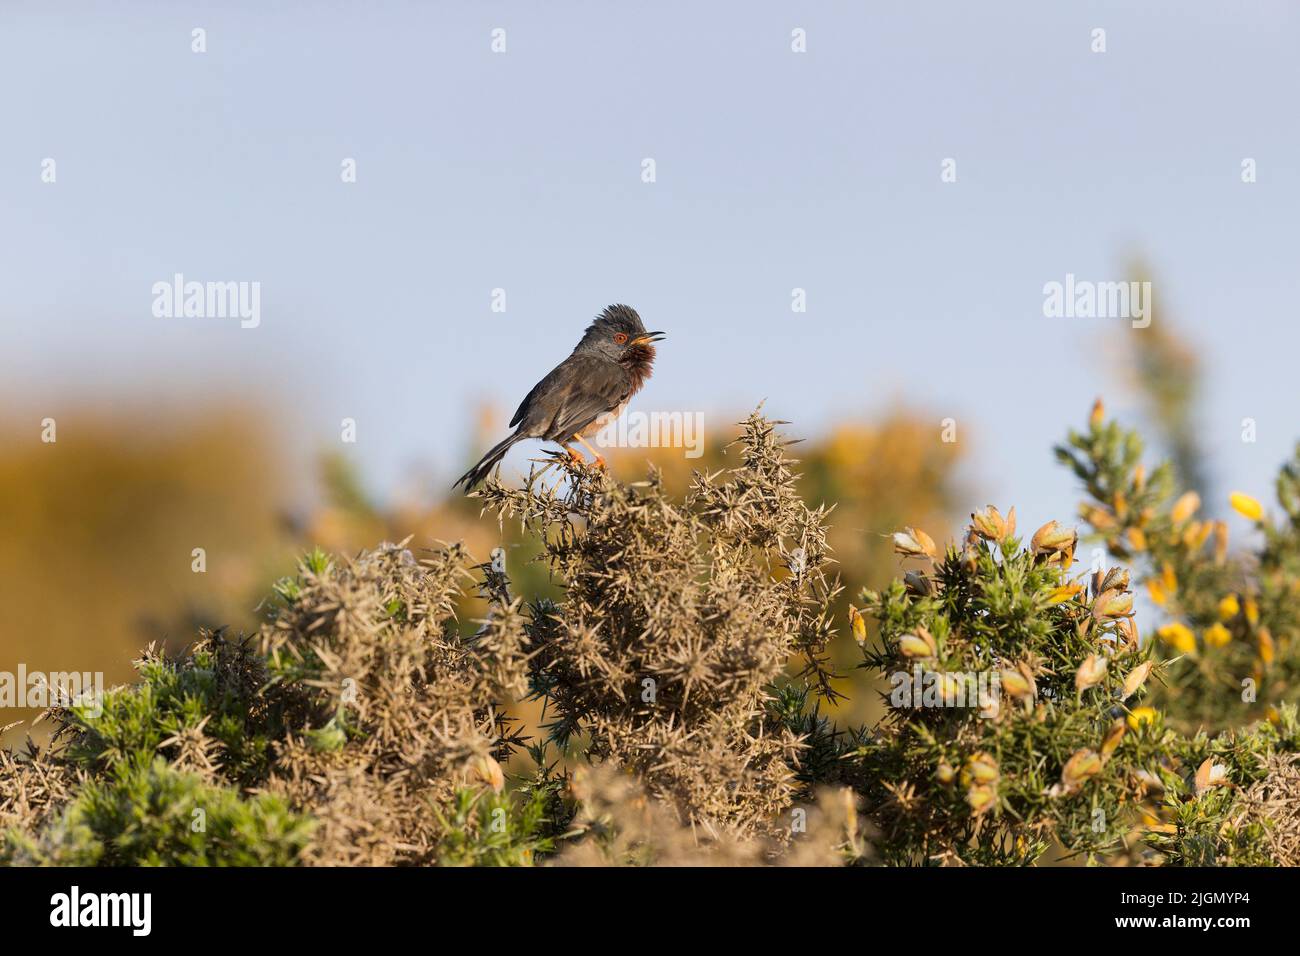 Dartford warbler Sylvia undata, adult male perched on gorse, singing, Suffolk, England, May Stock Photo